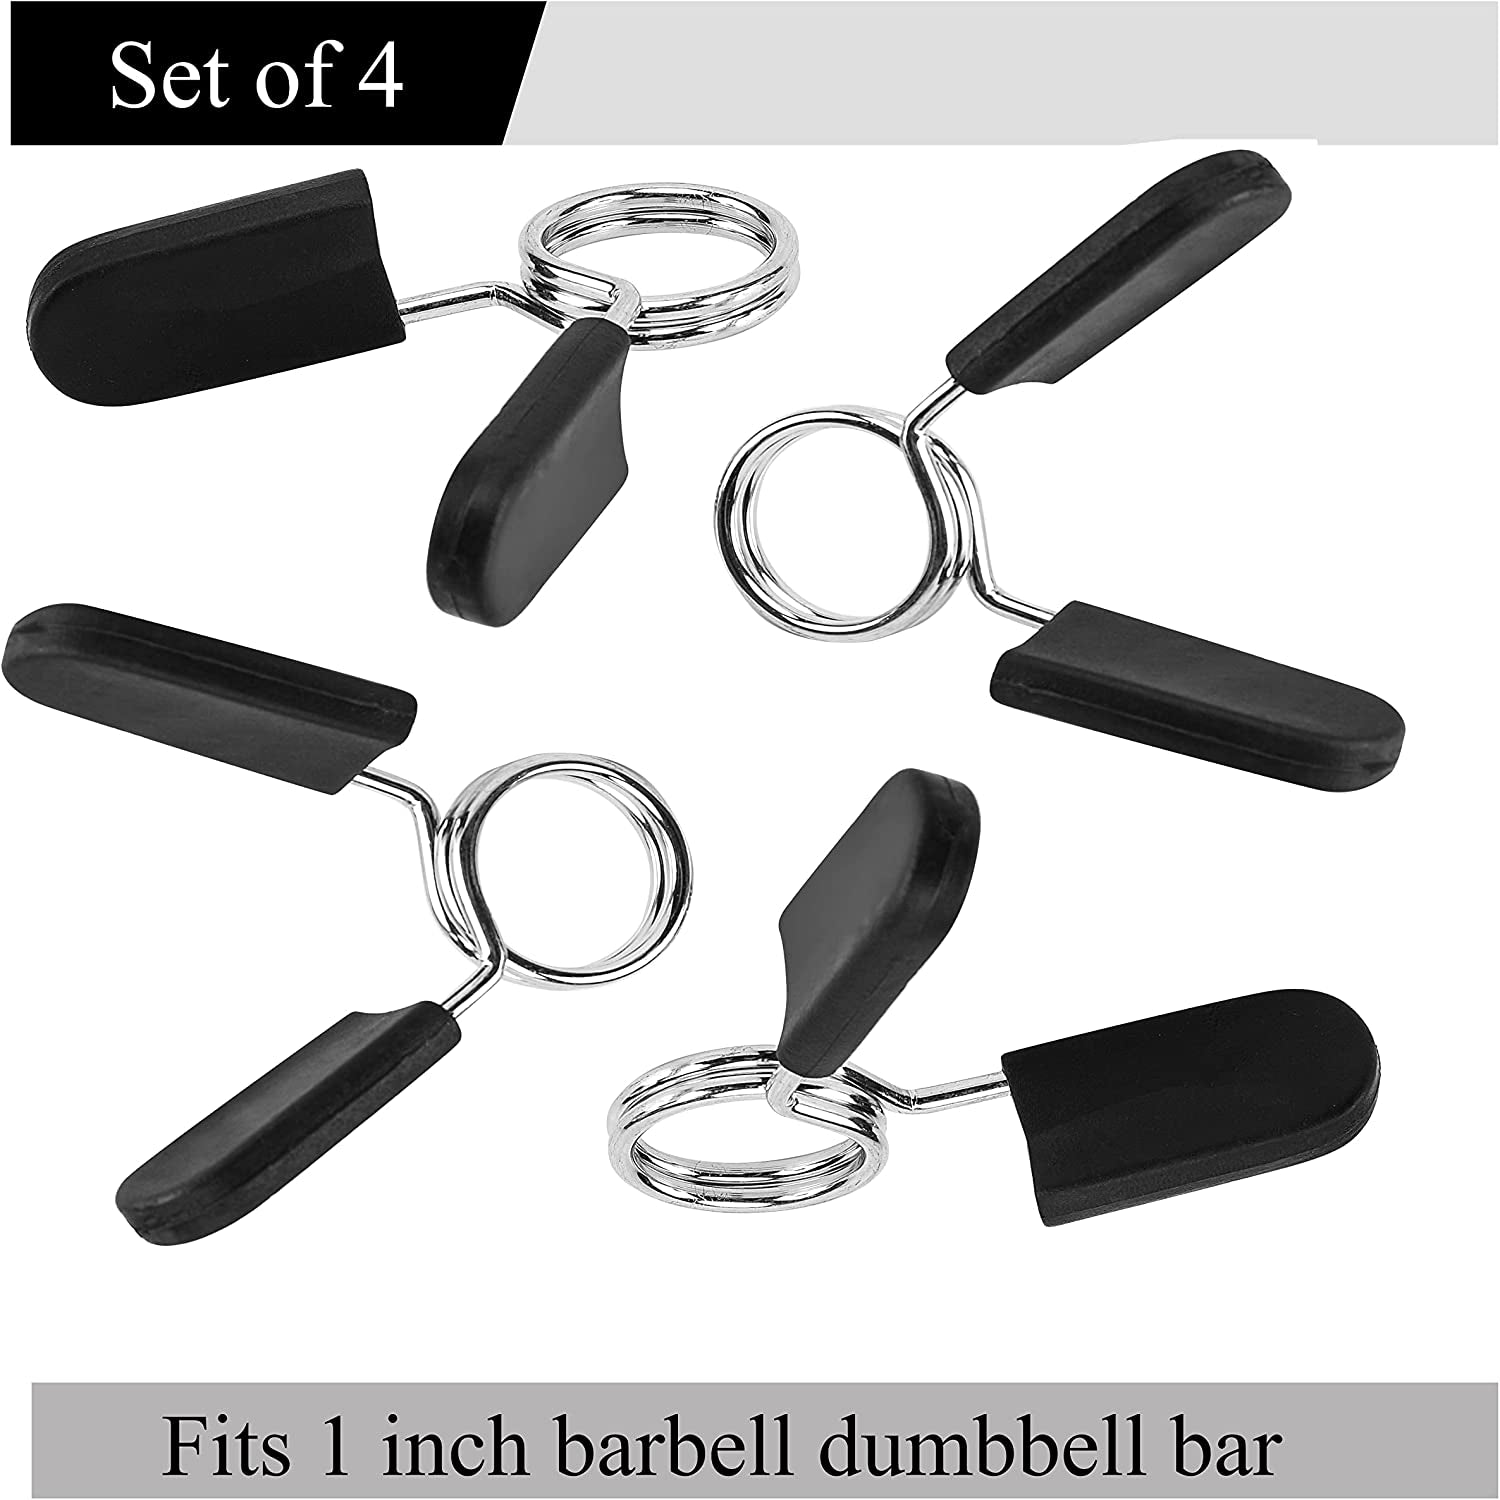 Barbell Clamps Dumbbell Spring Clip Circlip Collars 1 Inch Weight Bars Clips Fitness Weightlifting Lock Buckle 1 Inch for Standard Bar Barbell Strength Training Gym Accessory